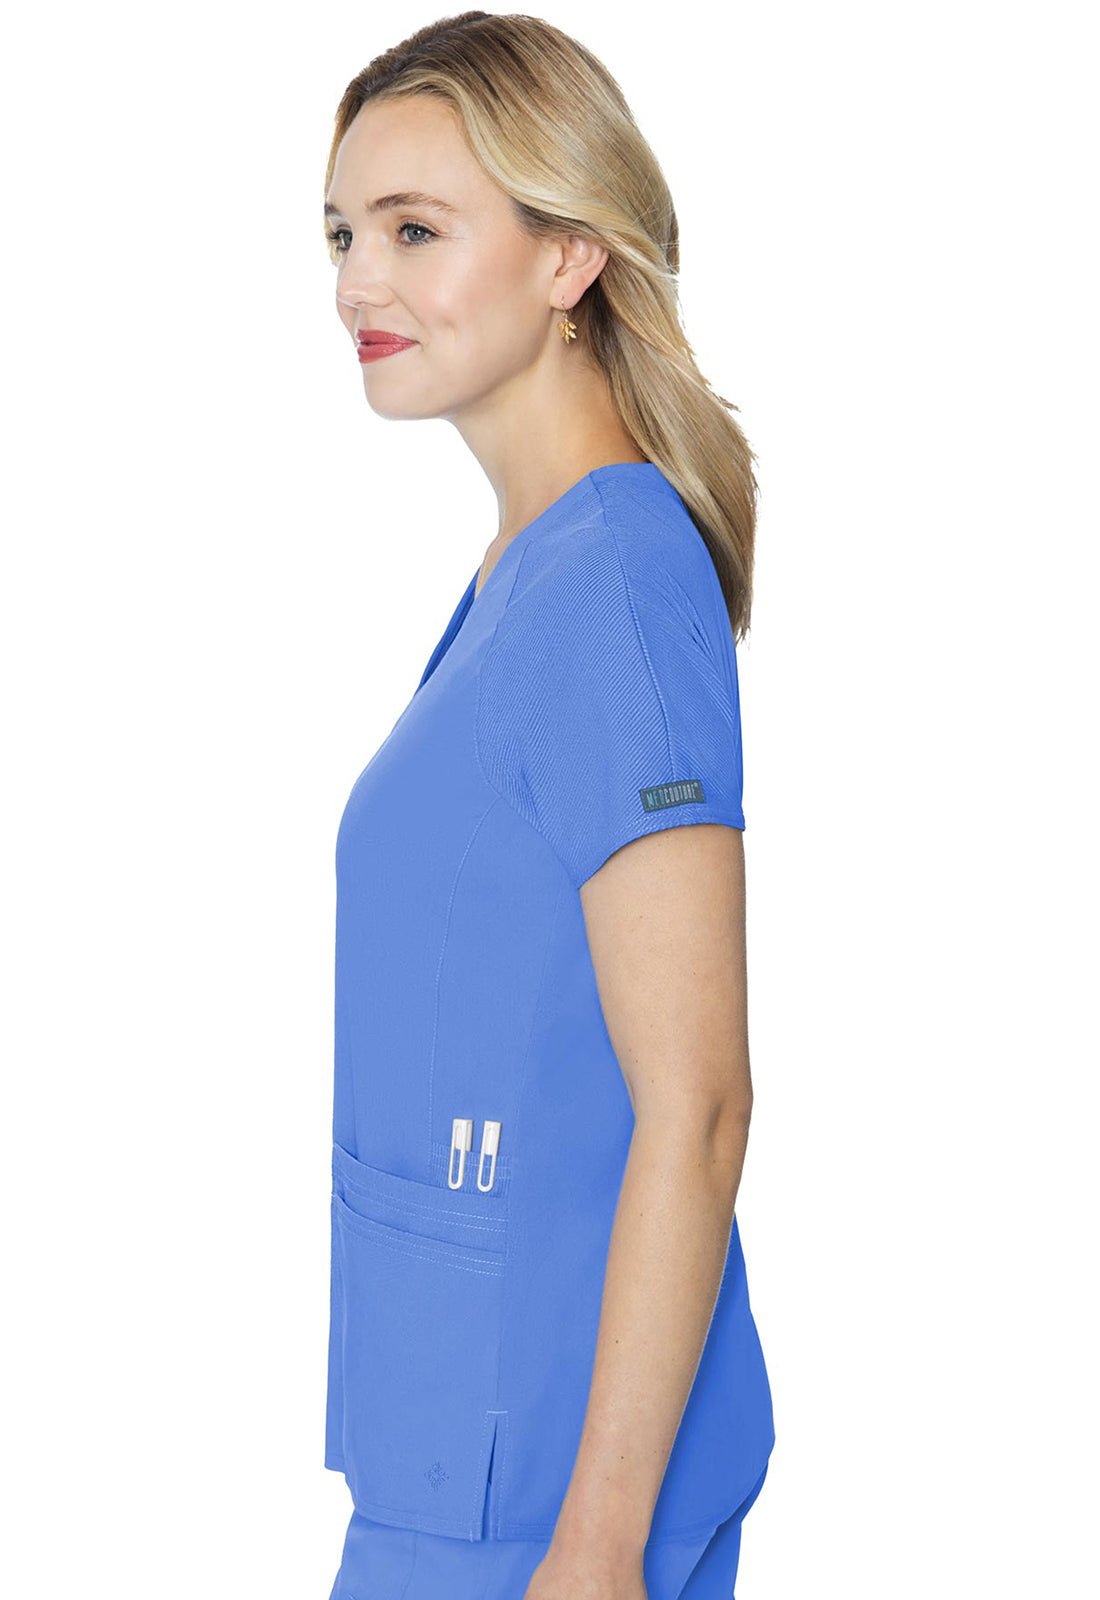 Med Couture Touch V Neck Scrub Top MC7425 in Black, Ciel, Navy, Pewter, Royal, Wine - Scrubs Select